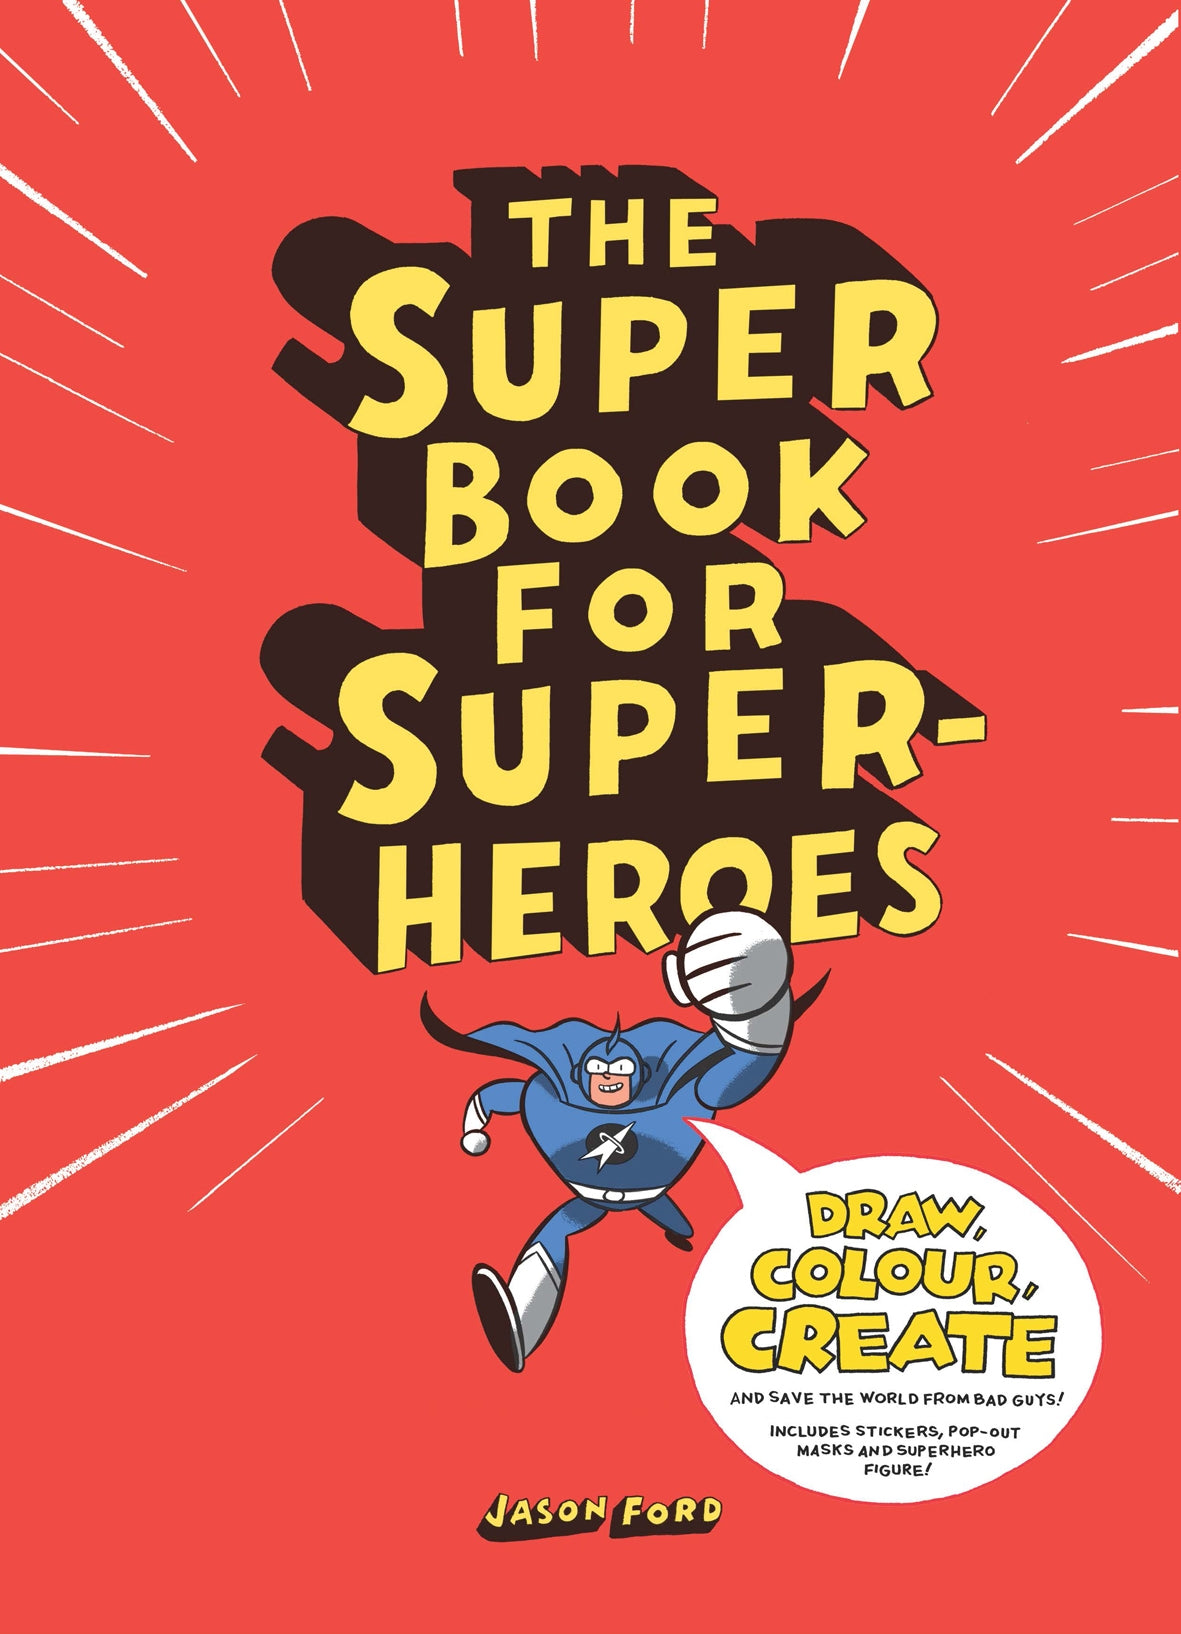 The Super Book for Superheroes by Jason Ford